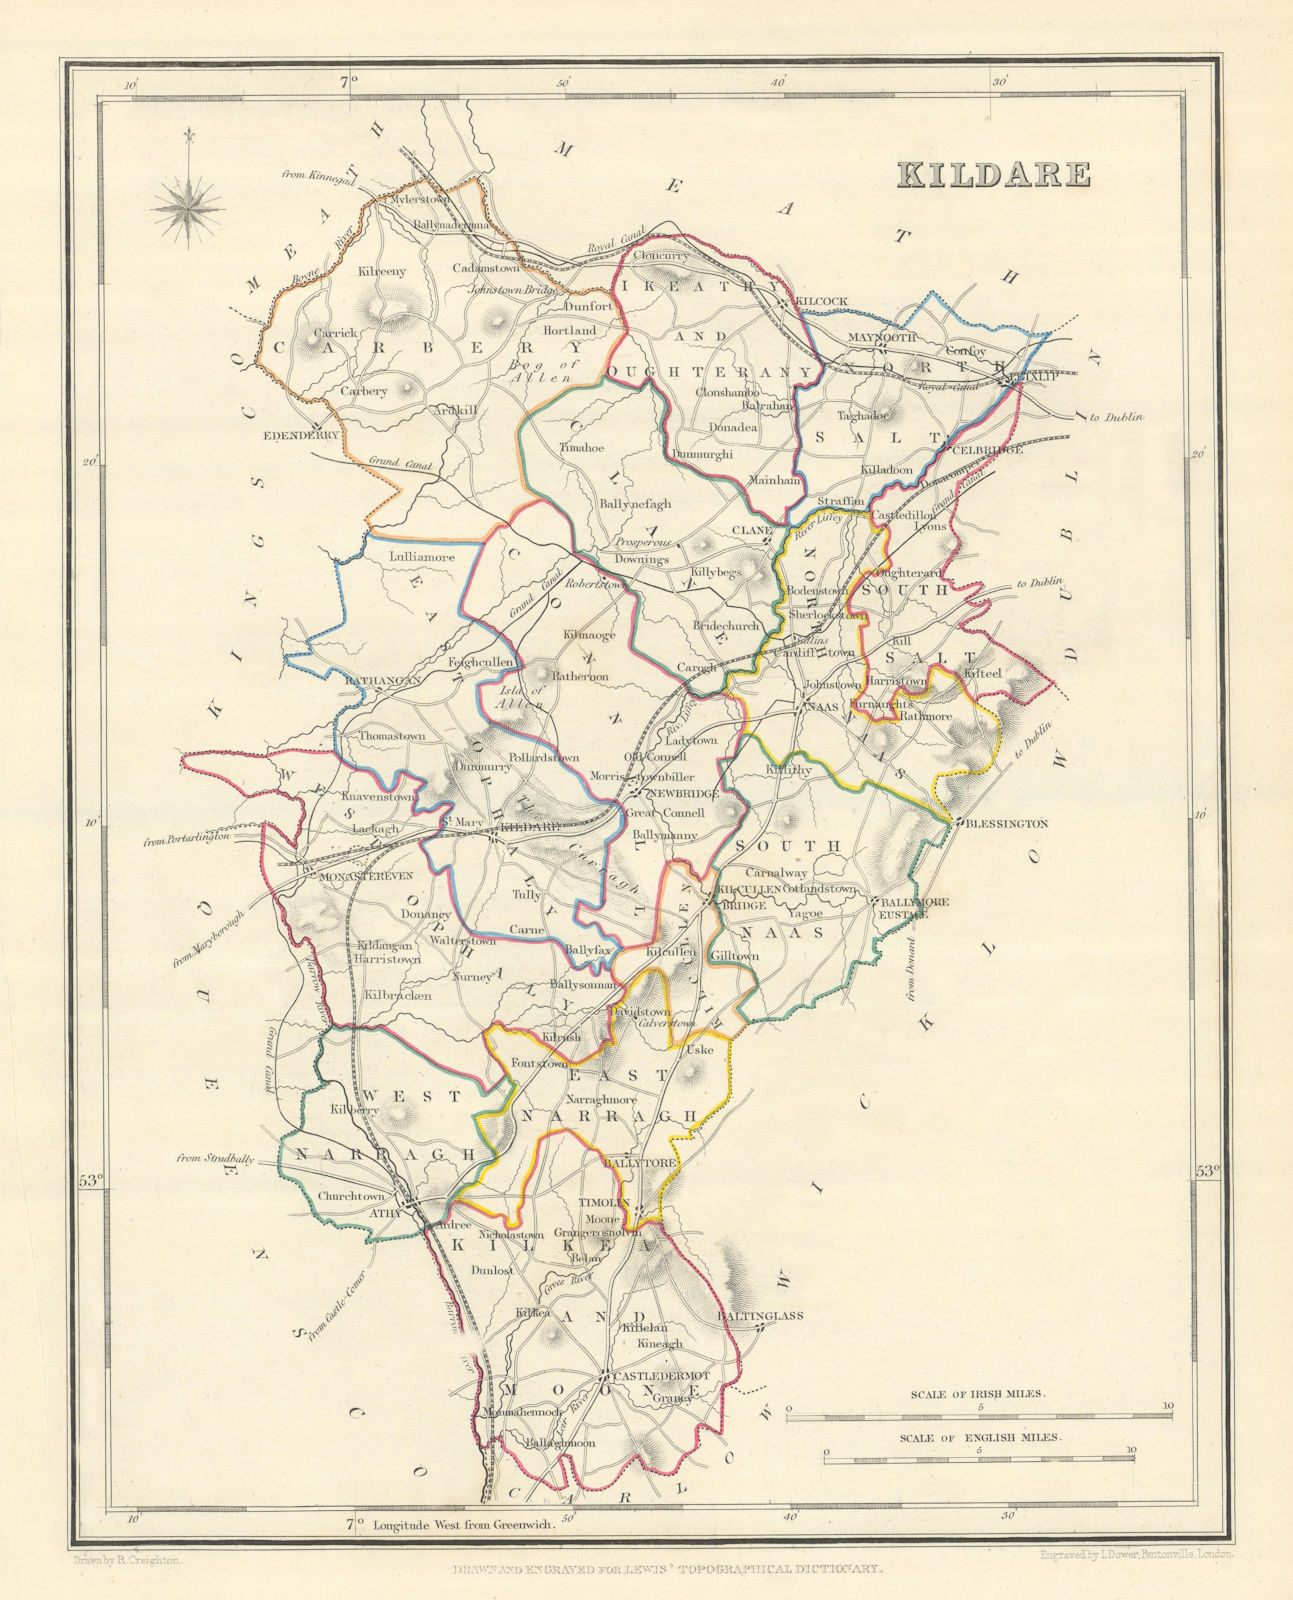 COUNTY KILDARE antique map for LEWIS by CREIGHTON & DOWER. Ireland 1850